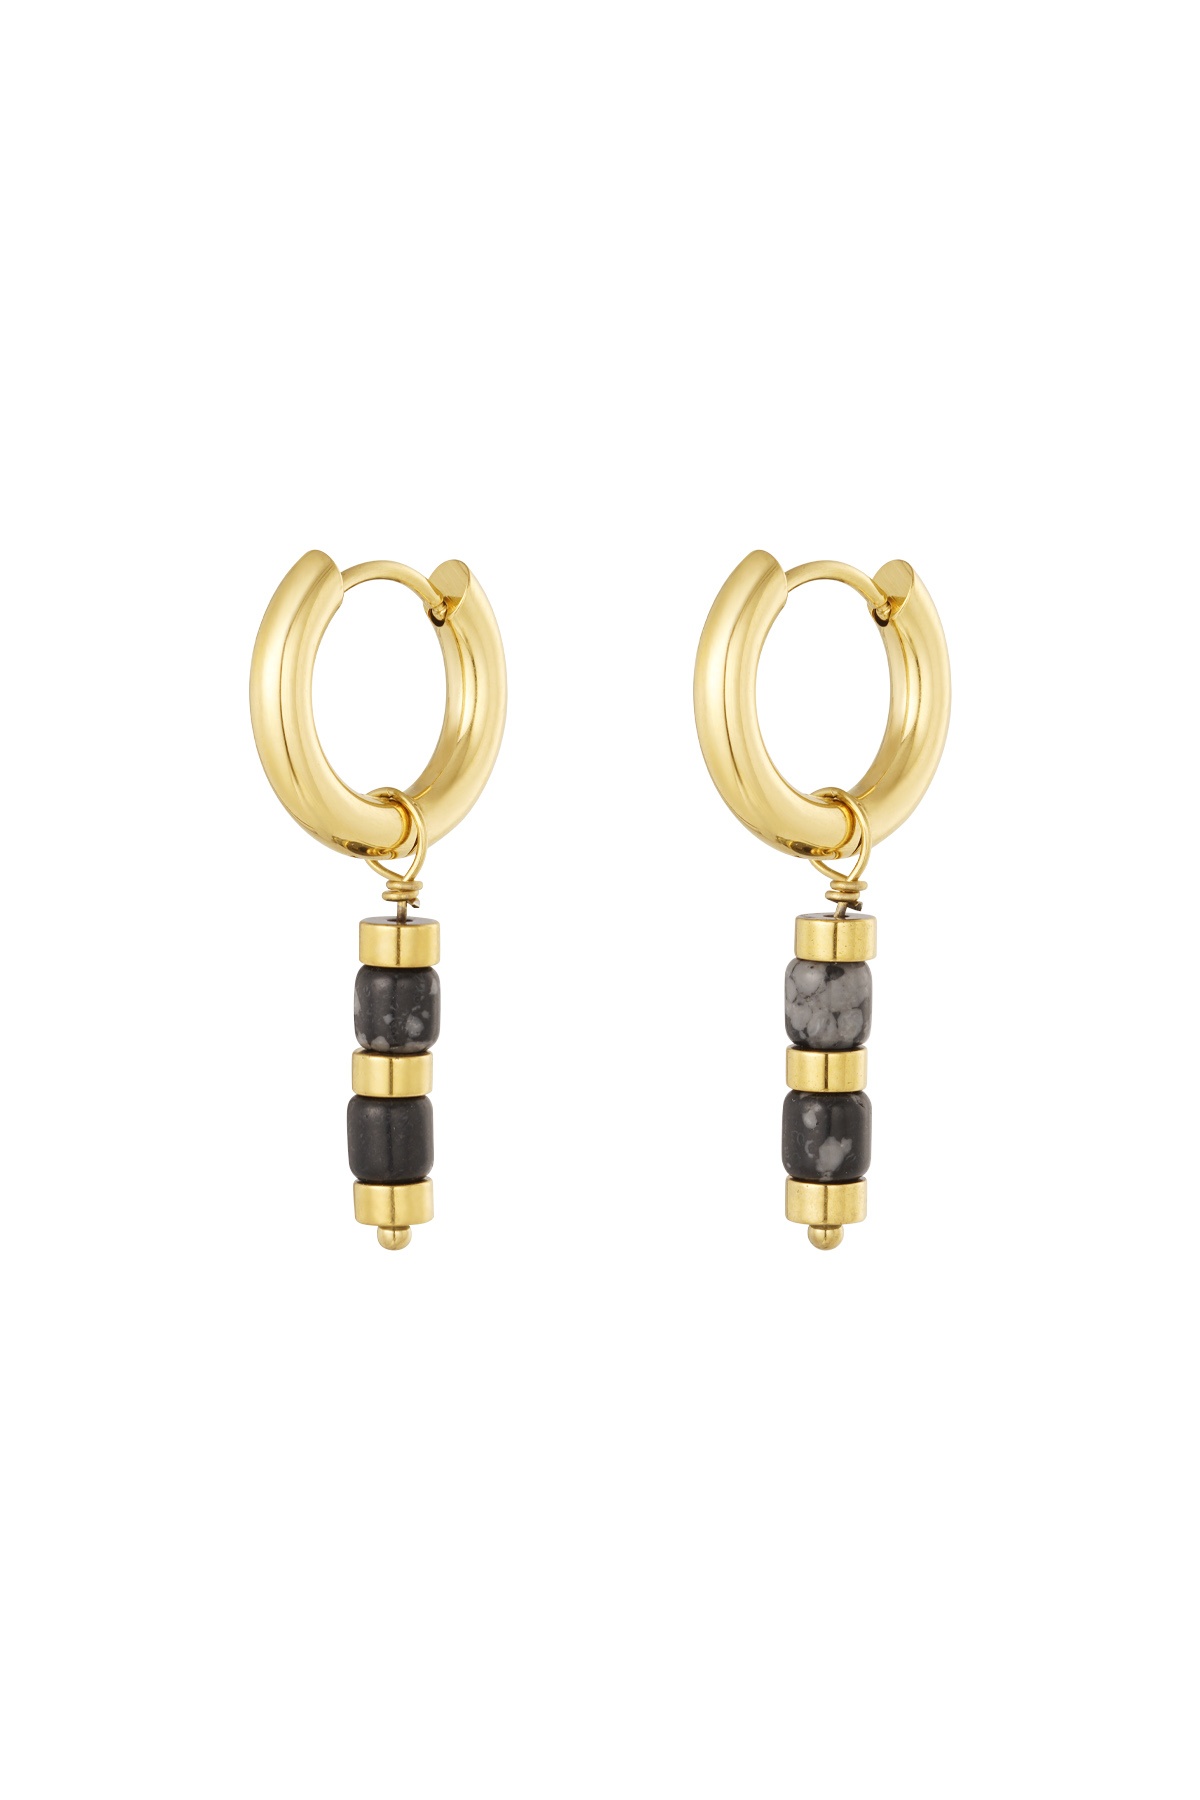 Earrings with beads and gold details - gold/black h5 